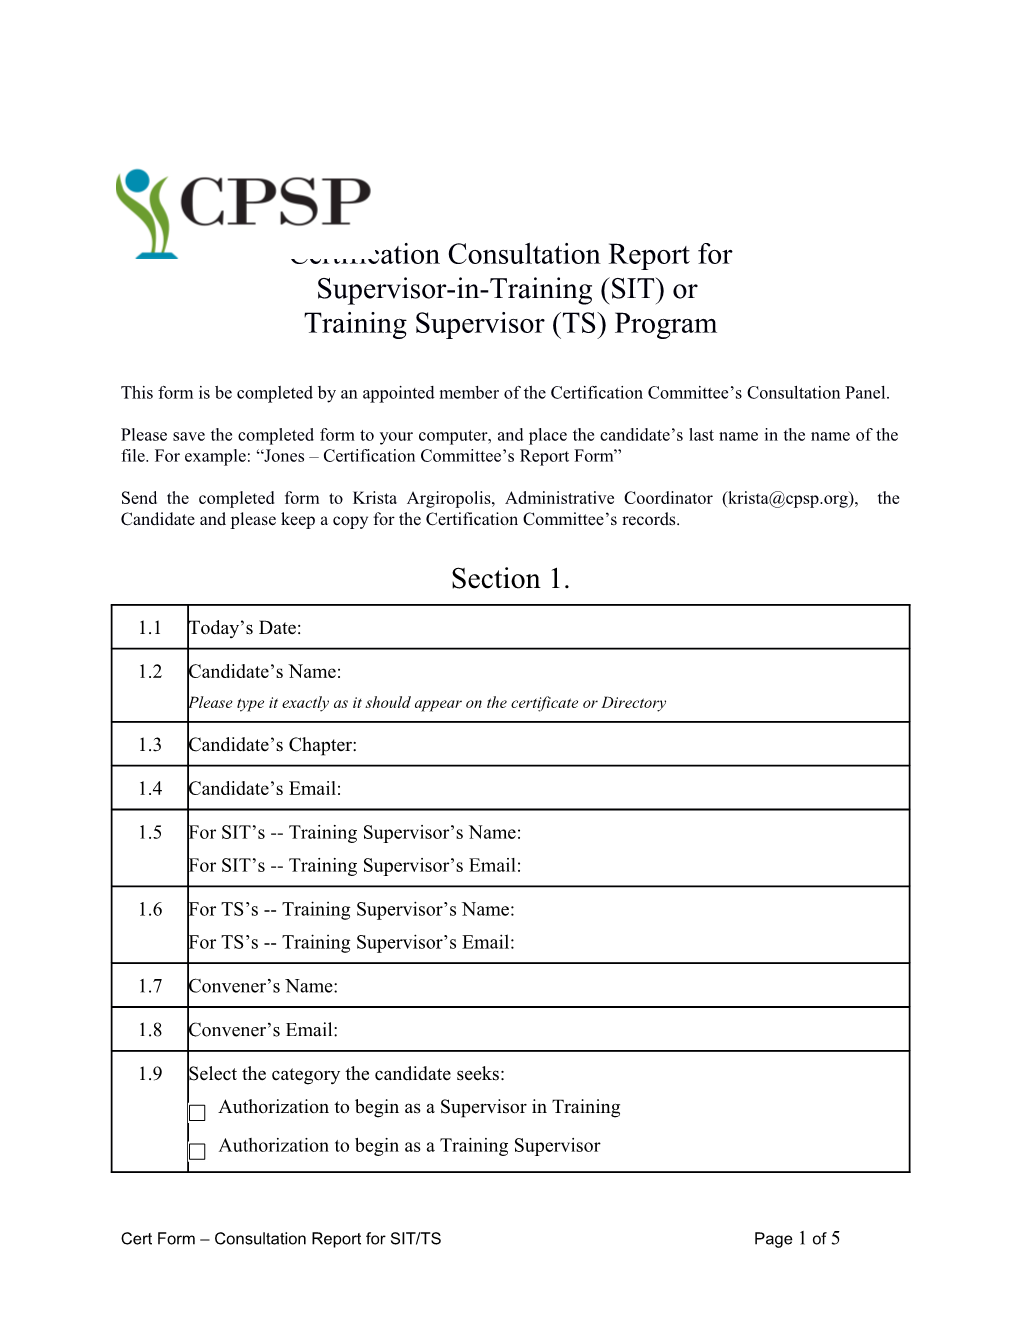 Certification Consultation Report For